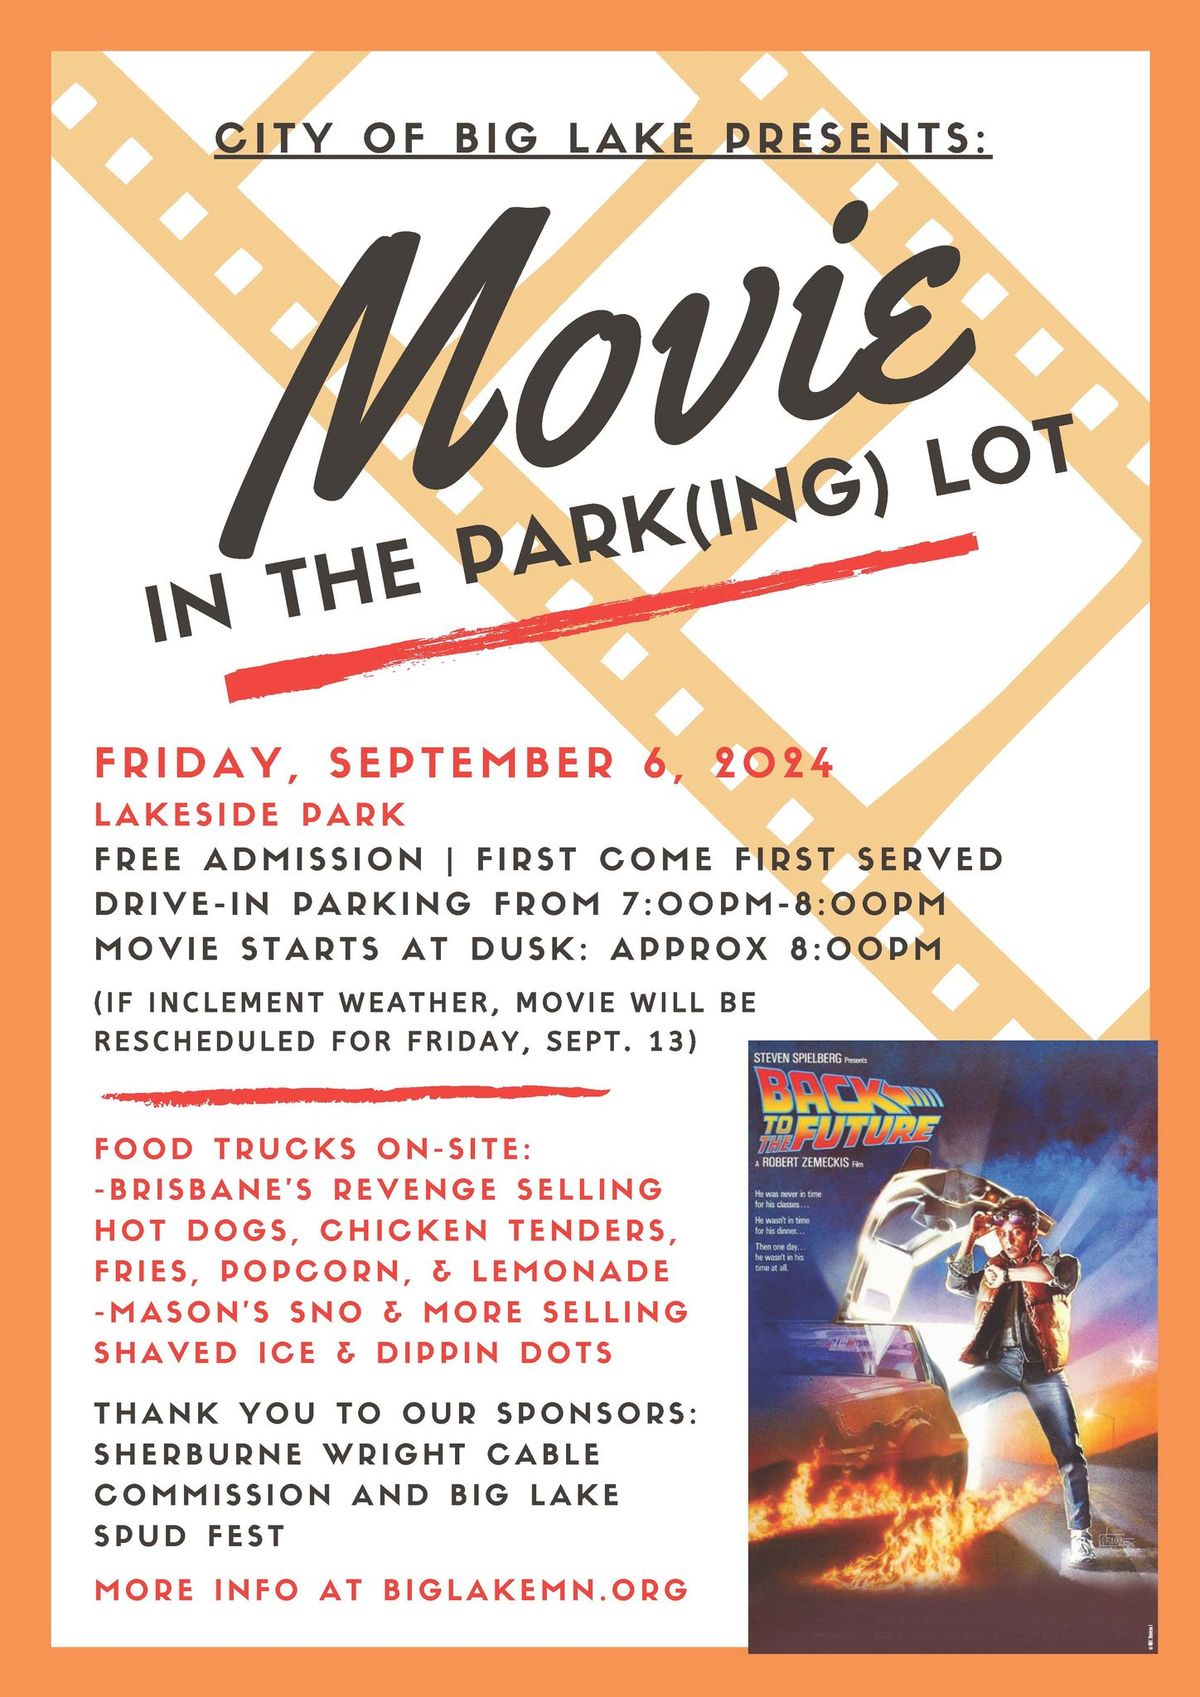 Movie in the Park(ing) Lot: Back to the Future